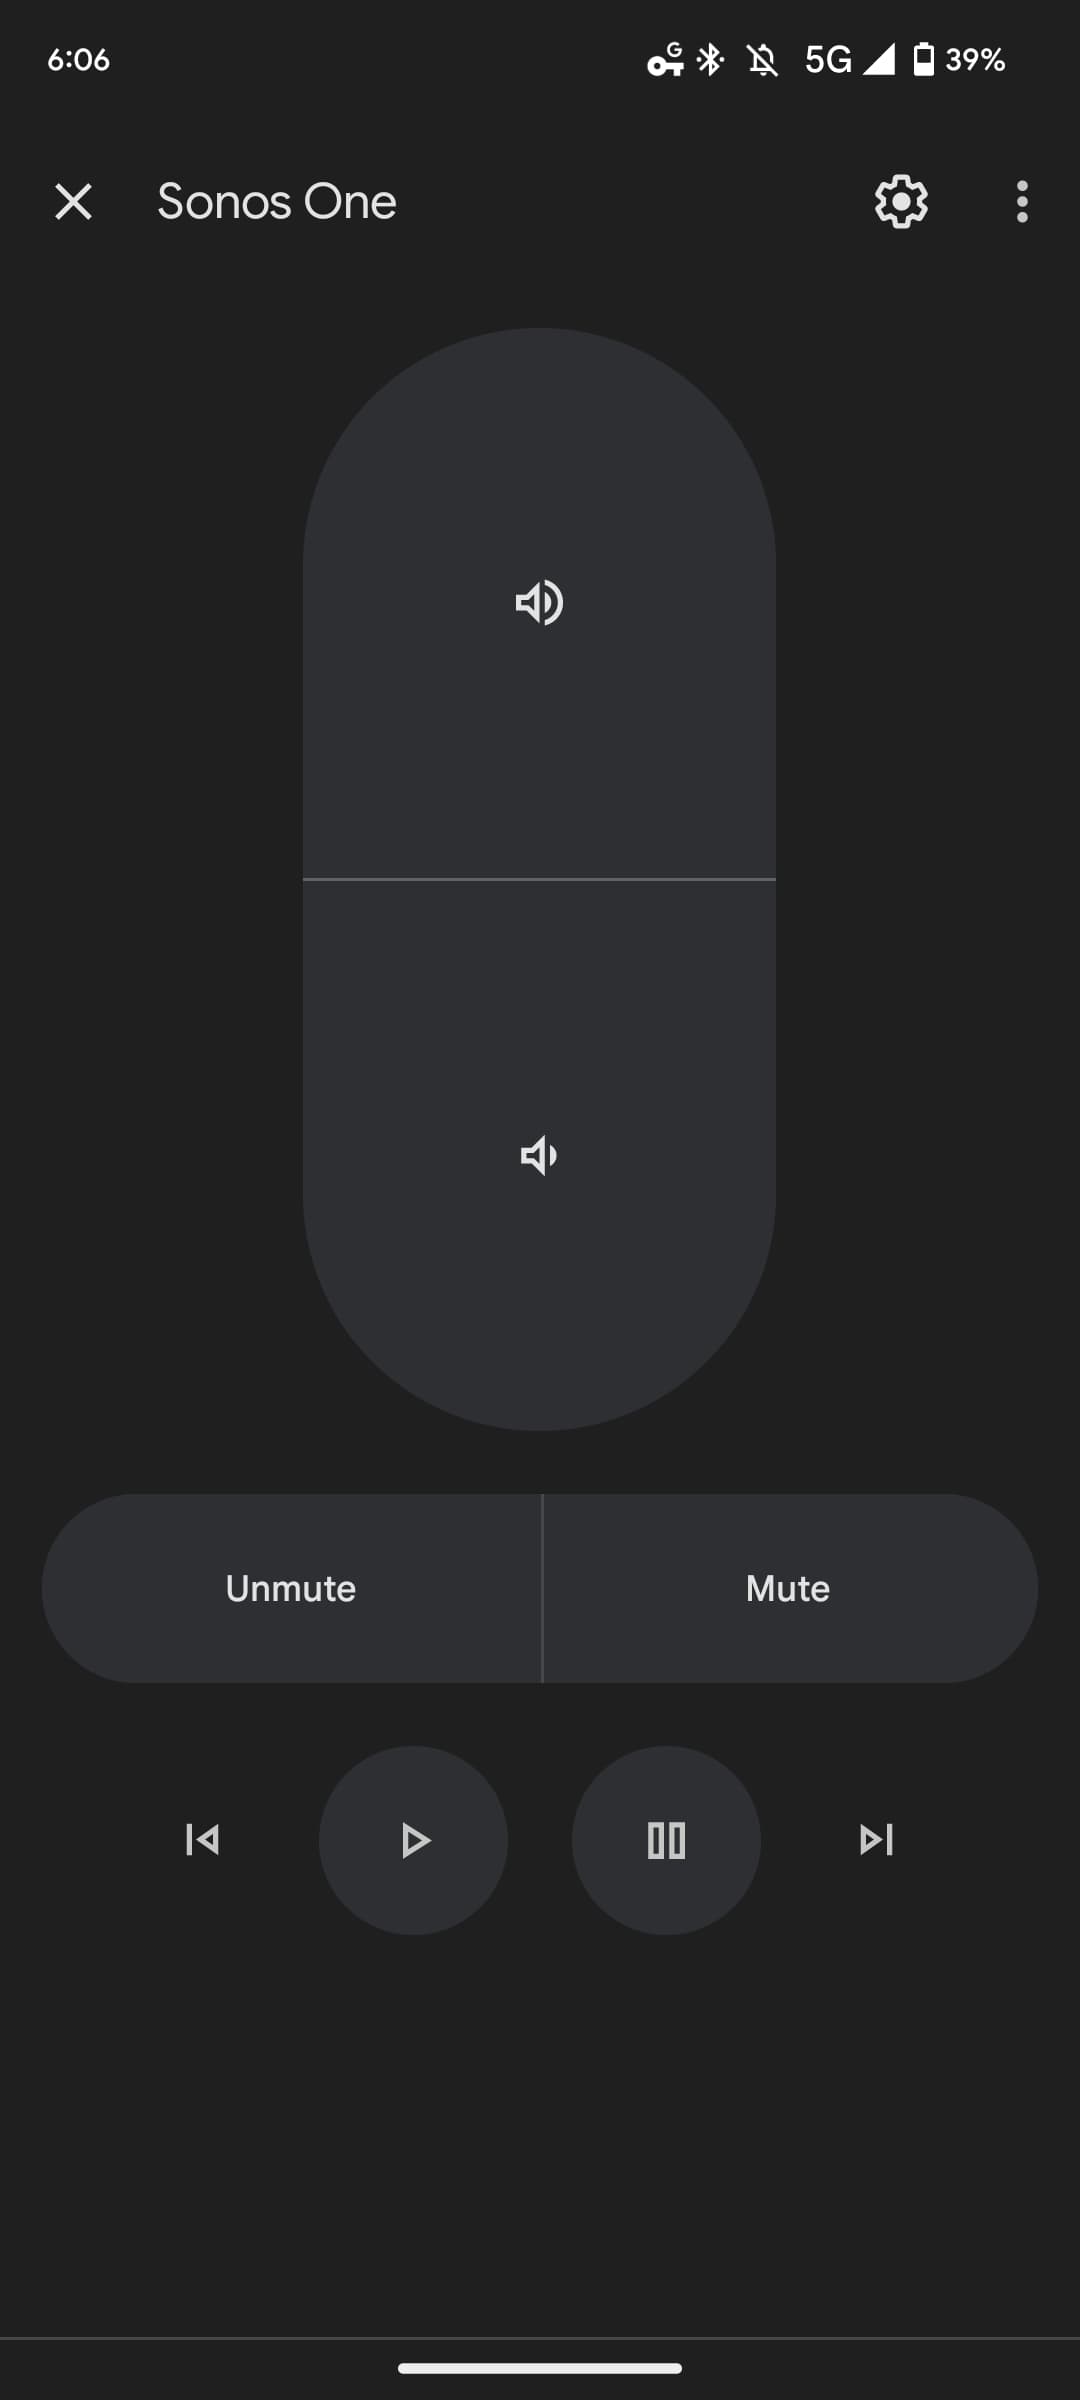 Google Home app rolls out full TV controls on supported sets [U]